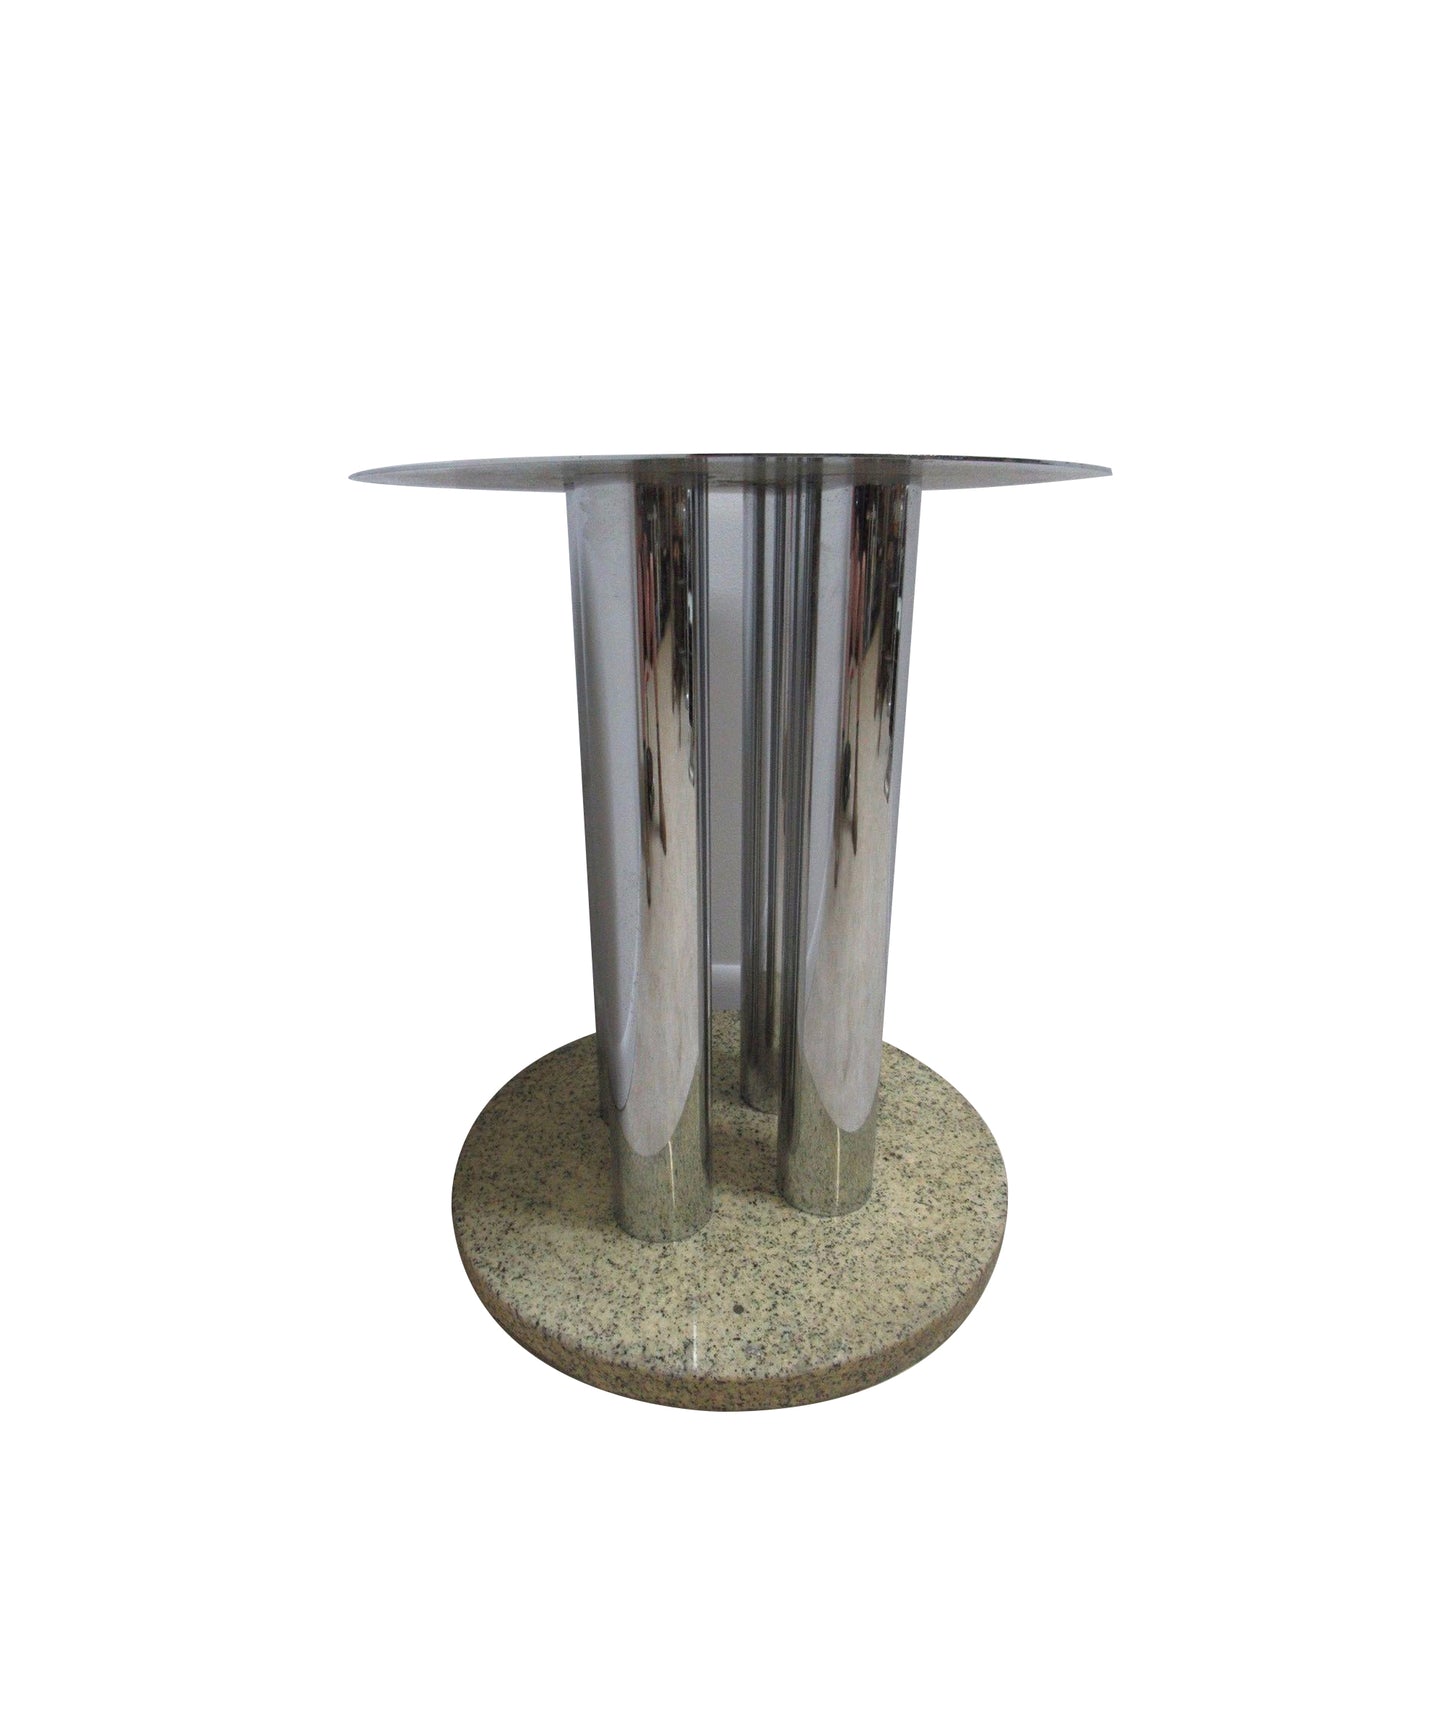 Vintage Chrome & Marble Round Pedestal Dining Table